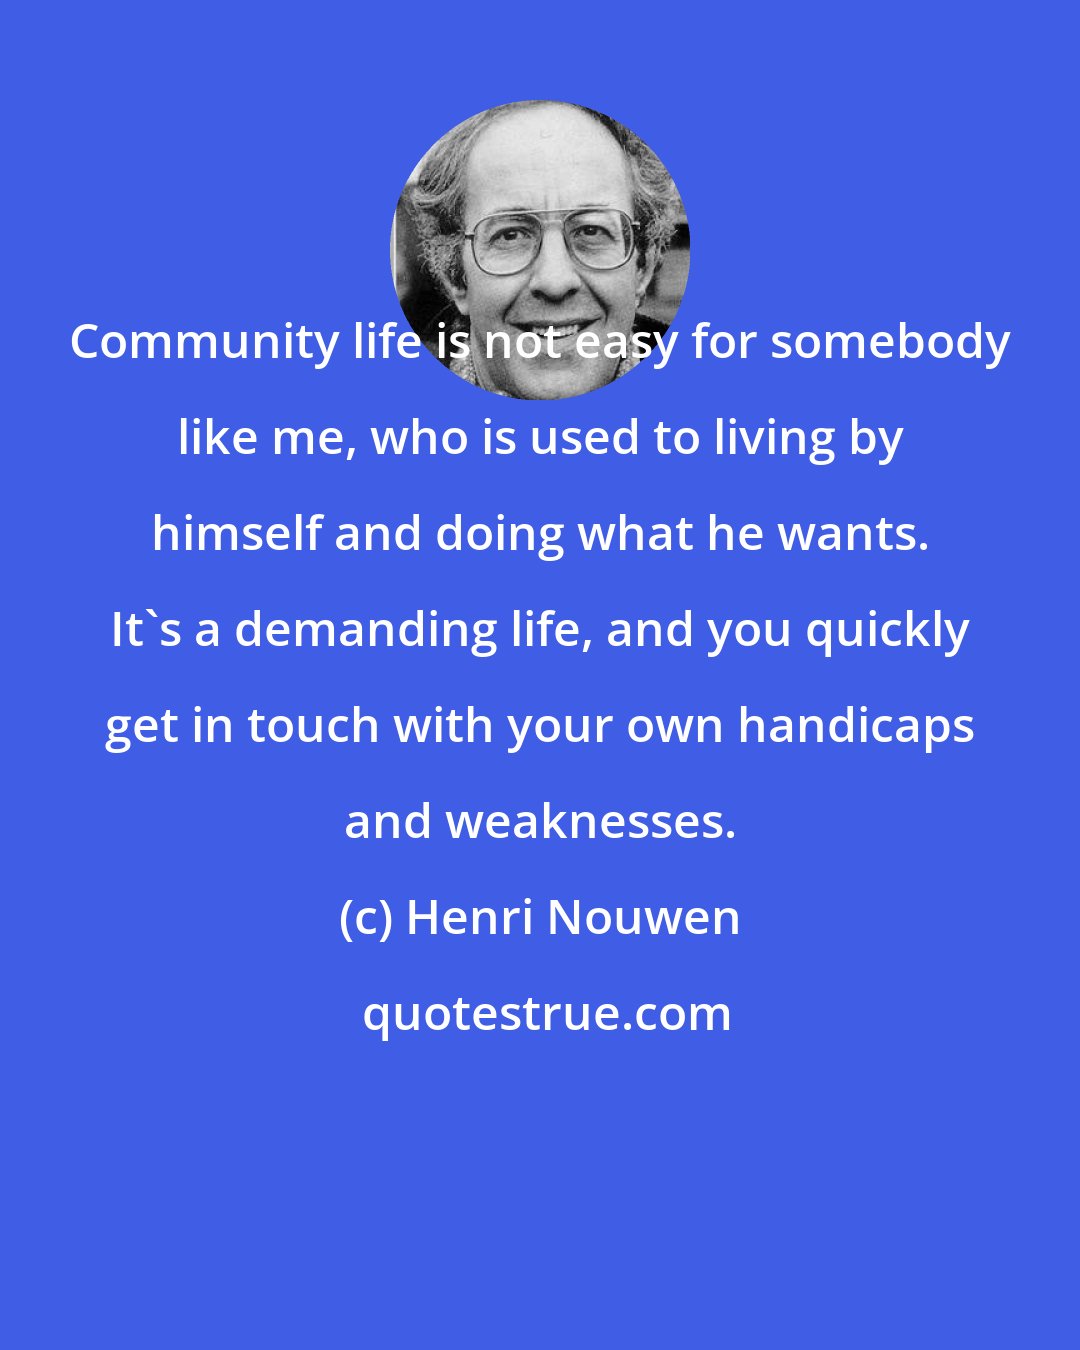 Henri Nouwen: Community life is not easy for somebody like me, who is used to living by himself and doing what he wants. It's a demanding life, and you quickly get in touch with your own handicaps and weaknesses.